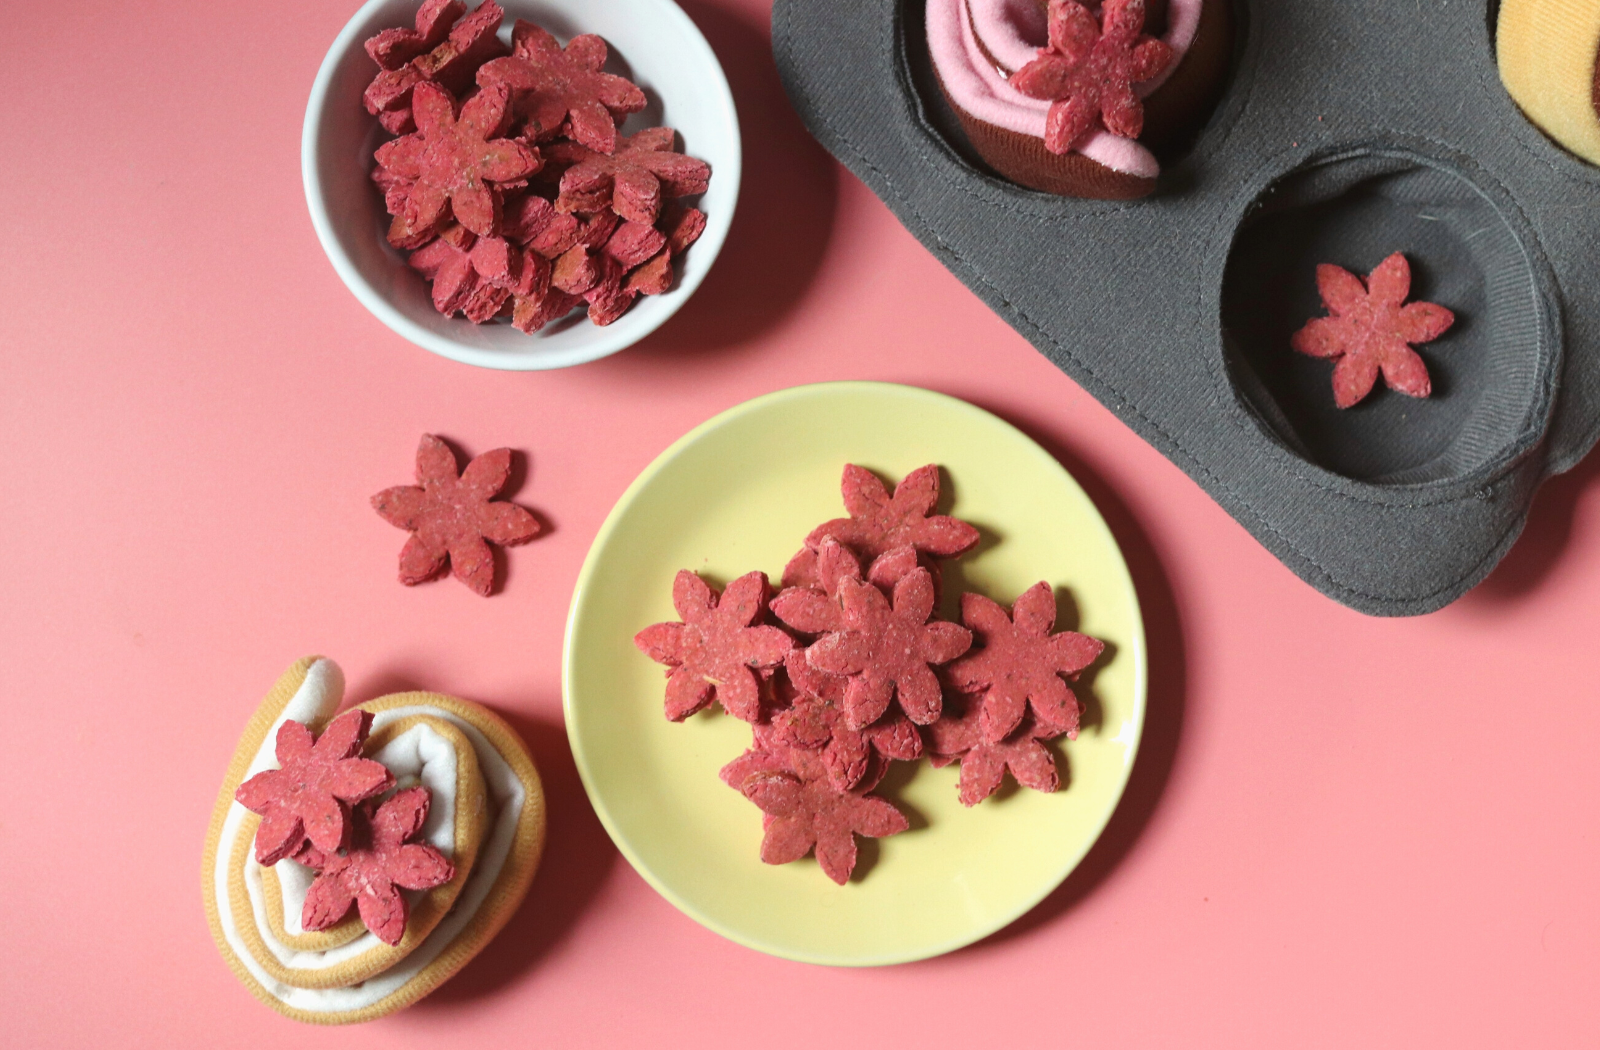 Beetroot peanut butter biscuits treats for dogs - gluten-free, wheat-free, egg-free, dairy-free, handmade in Malaysia